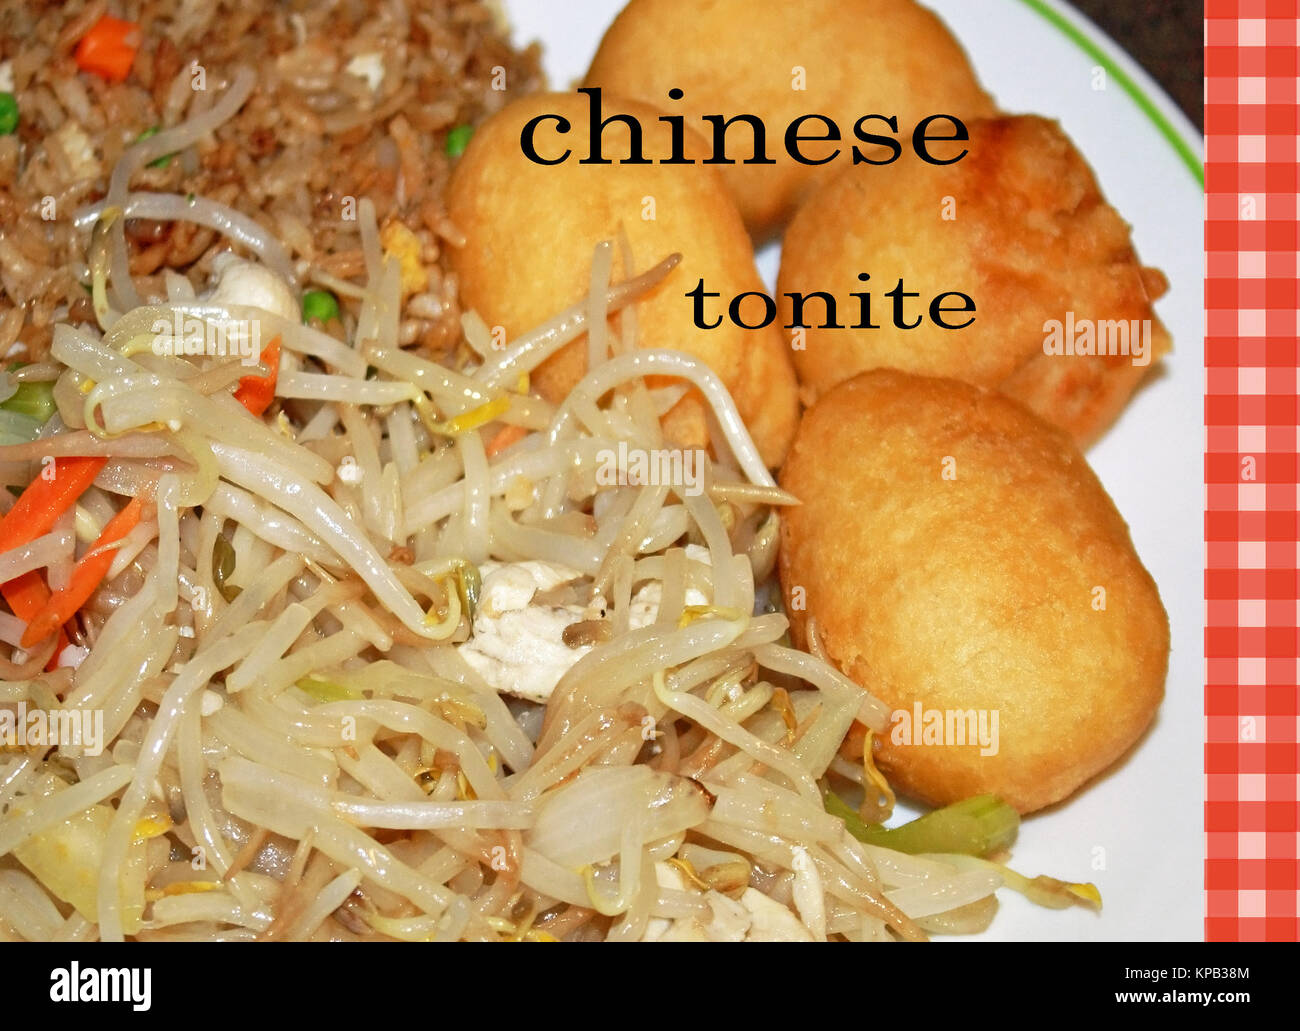 Chinese Take Out Food on a plate.  Deep fried chicken balls, chicken chop suey and chicken fried rice with vegetables Stock Photo